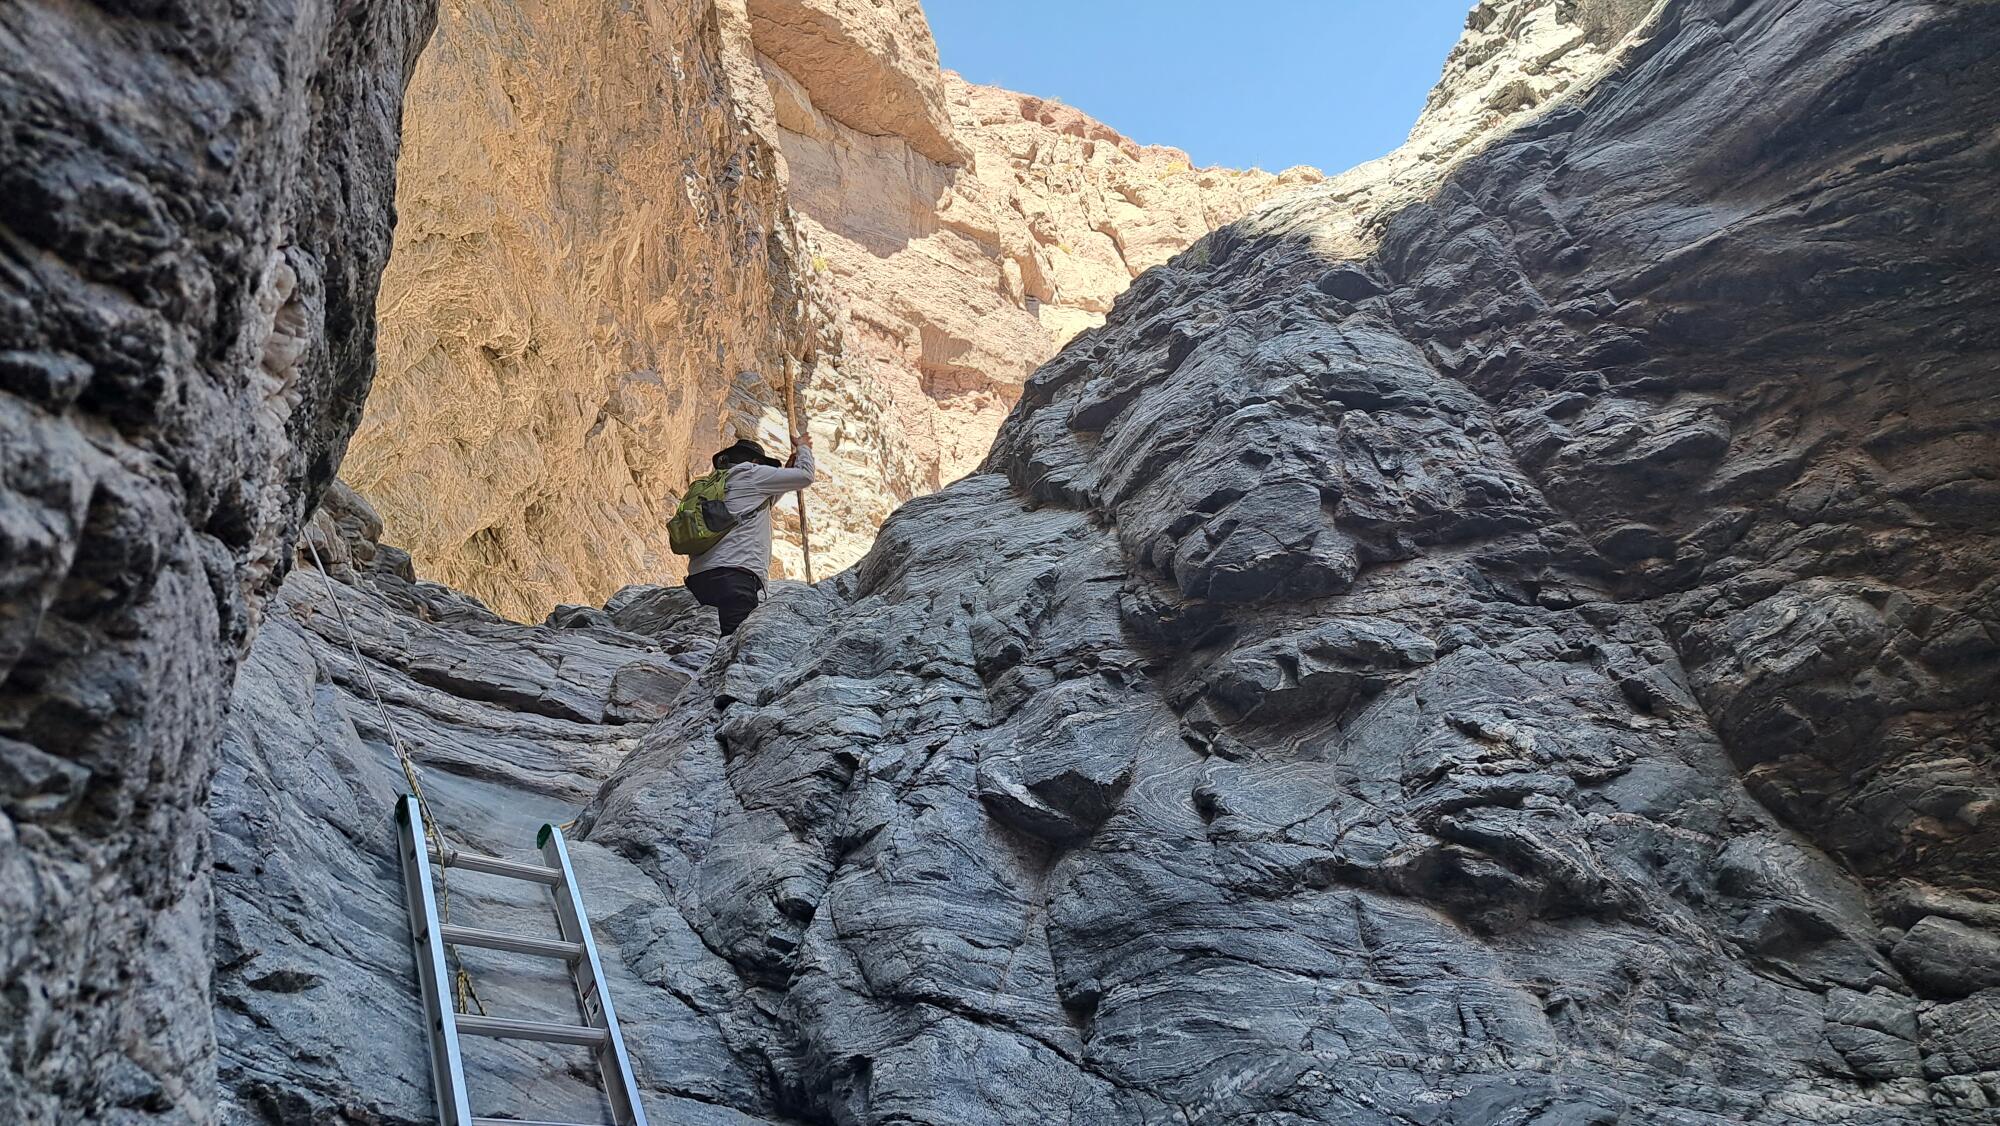 A ladder leads up a shaded cliff, where a man hikes